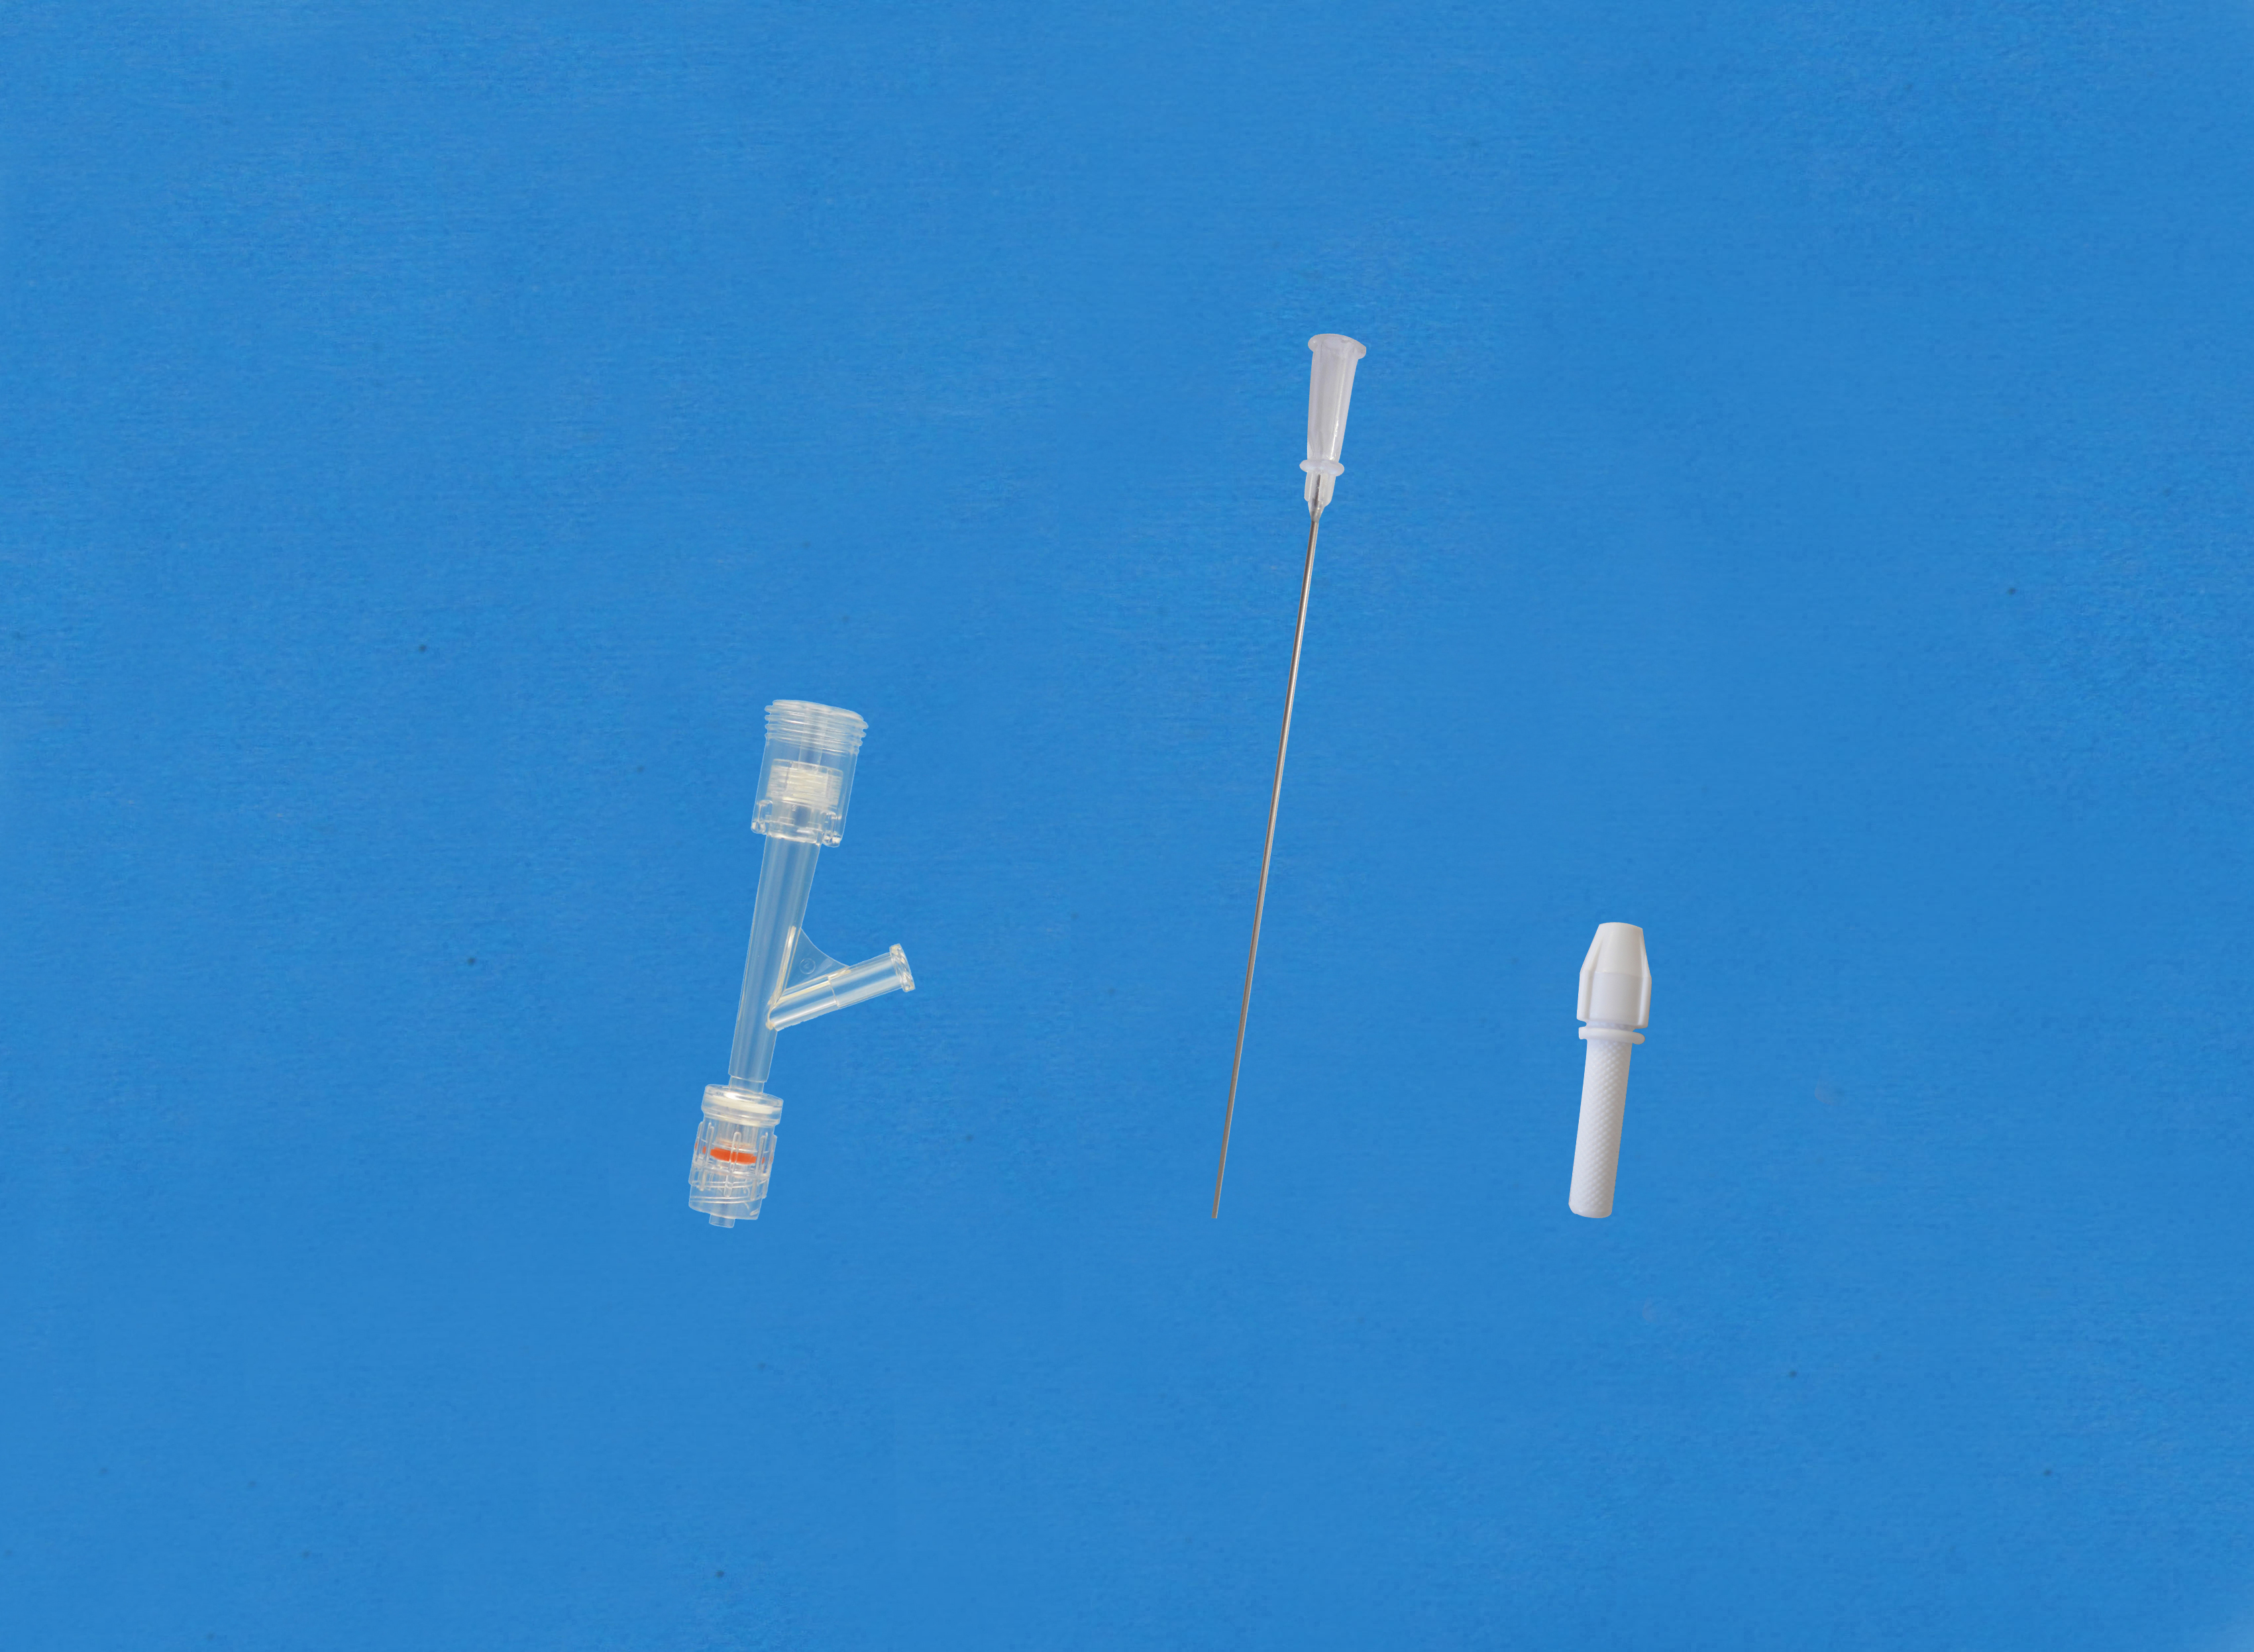 Haemostatic valves, Push-pull, Sideon Female Luer, Insertion Tool with Small Hub, White/Copper Torquer